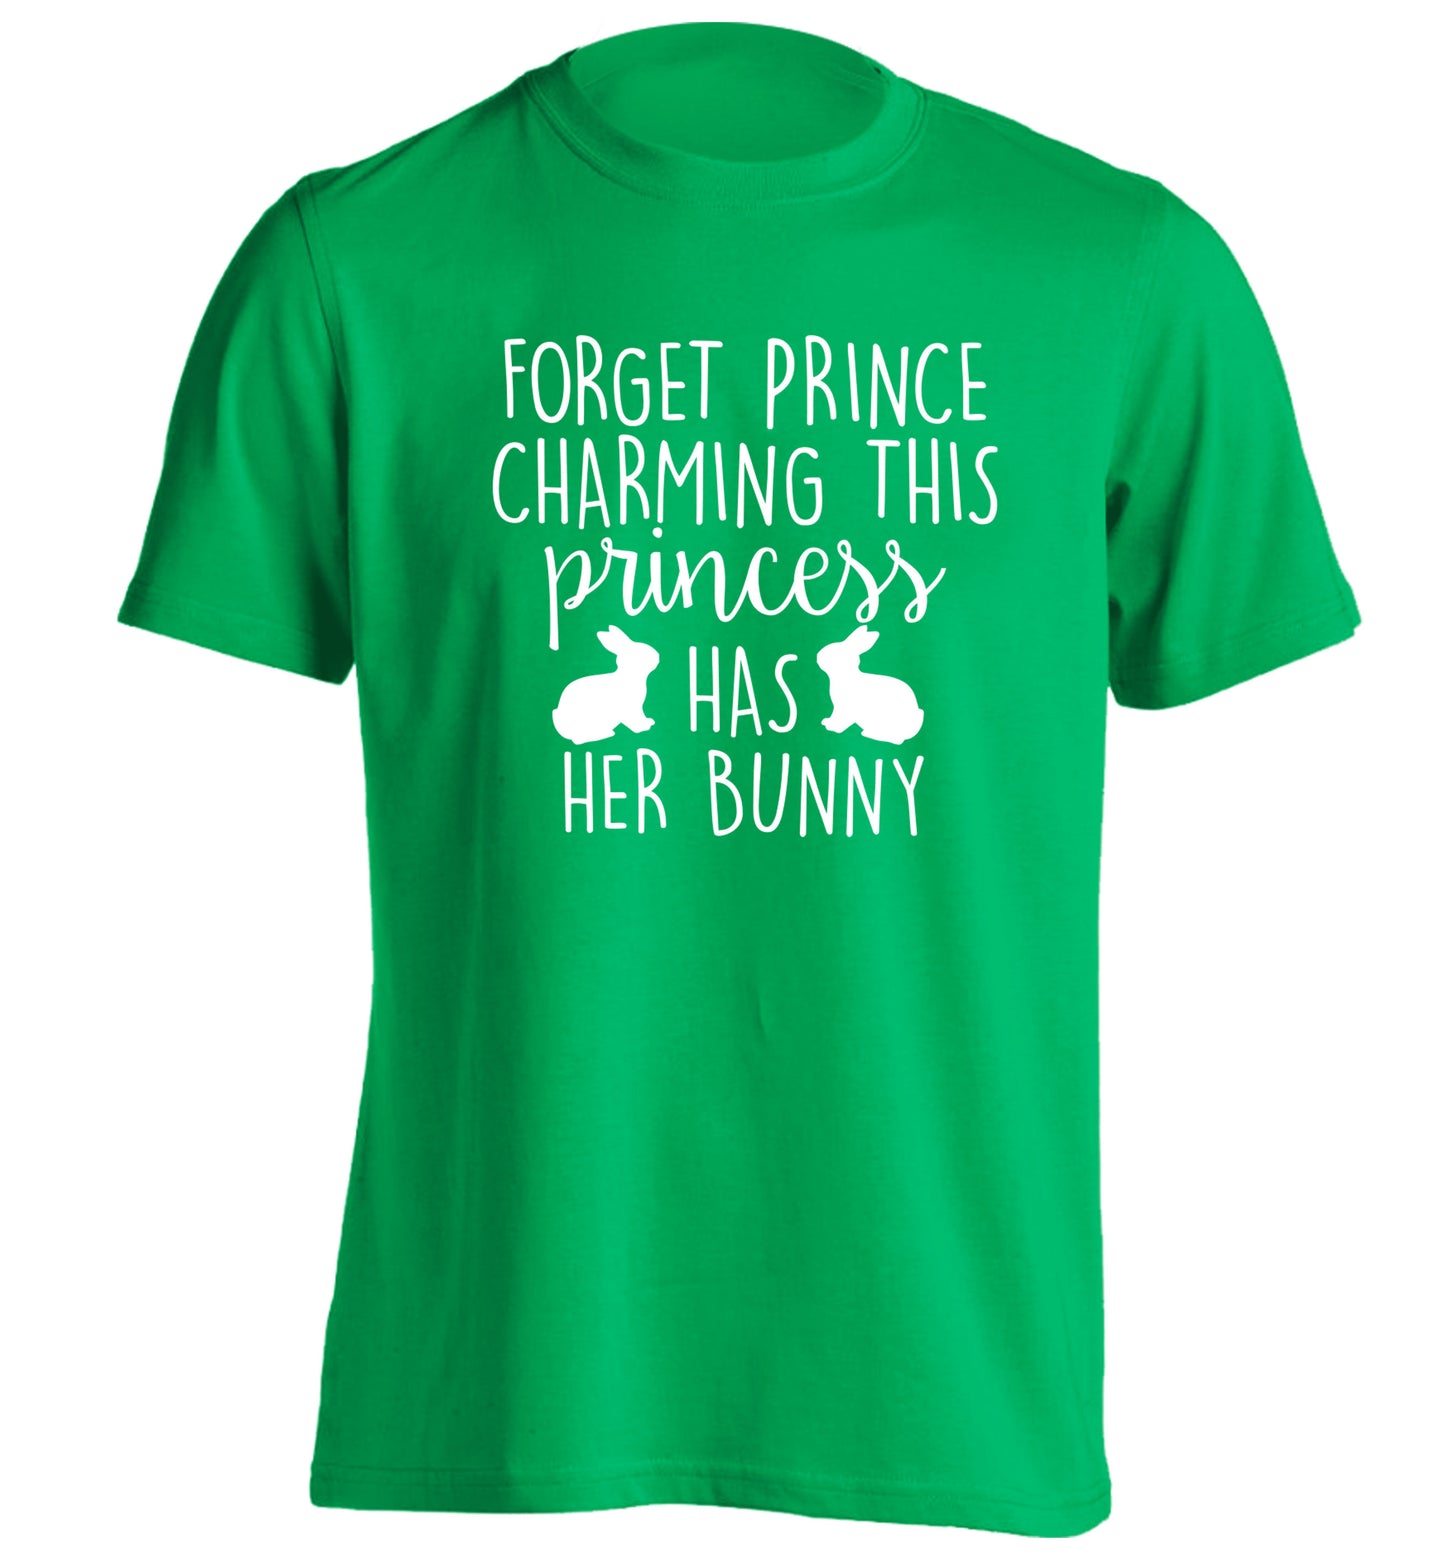 Forget prince charming this princess has her bunny adults unisex green Tshirt 2XL